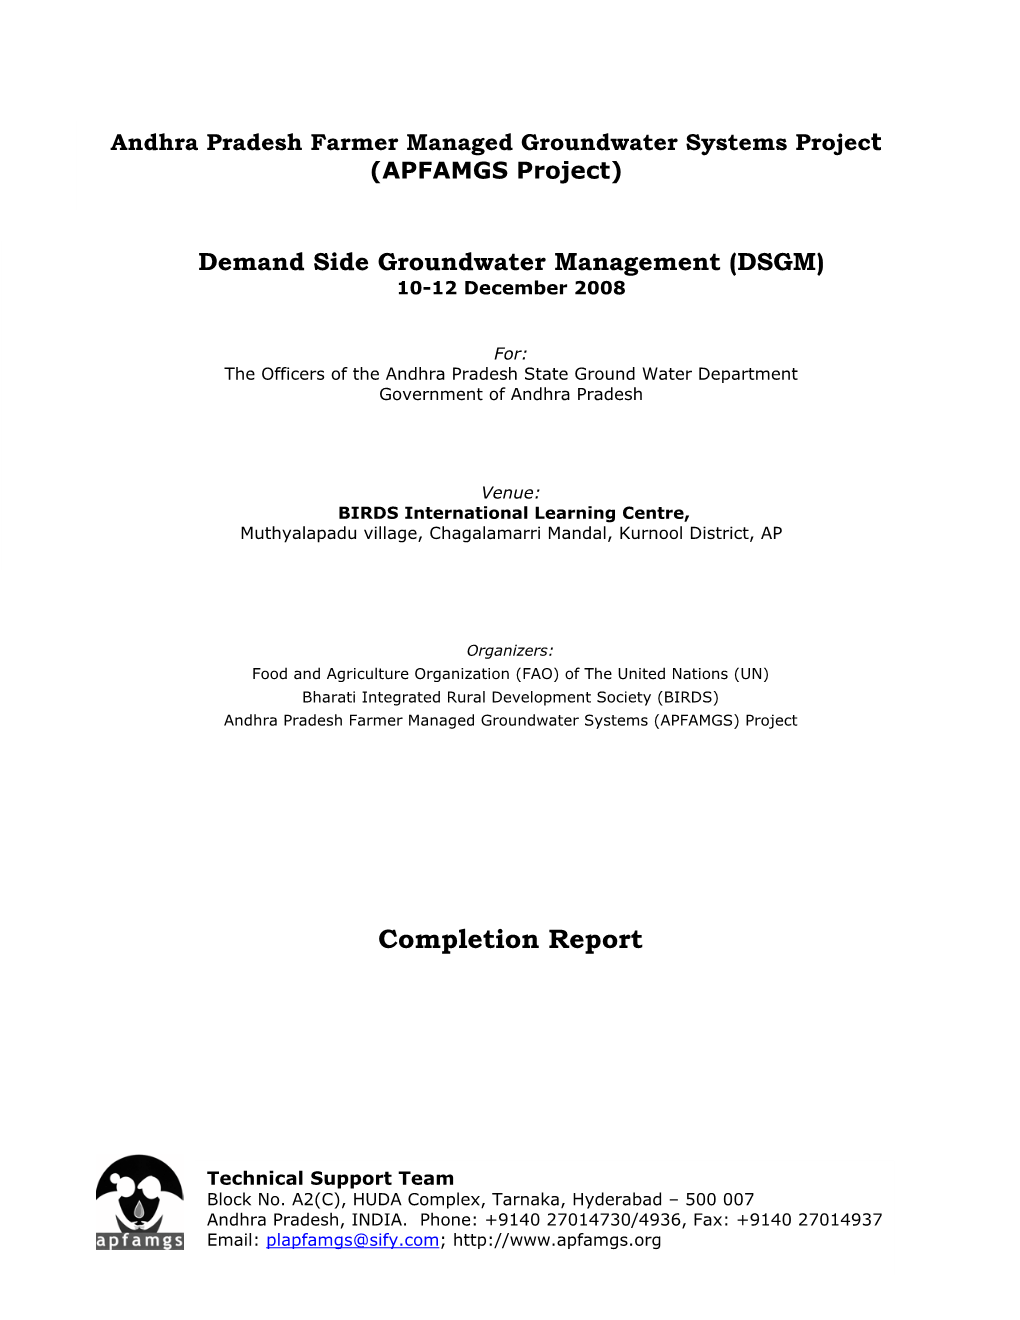 APFAMGS Project Completion Report